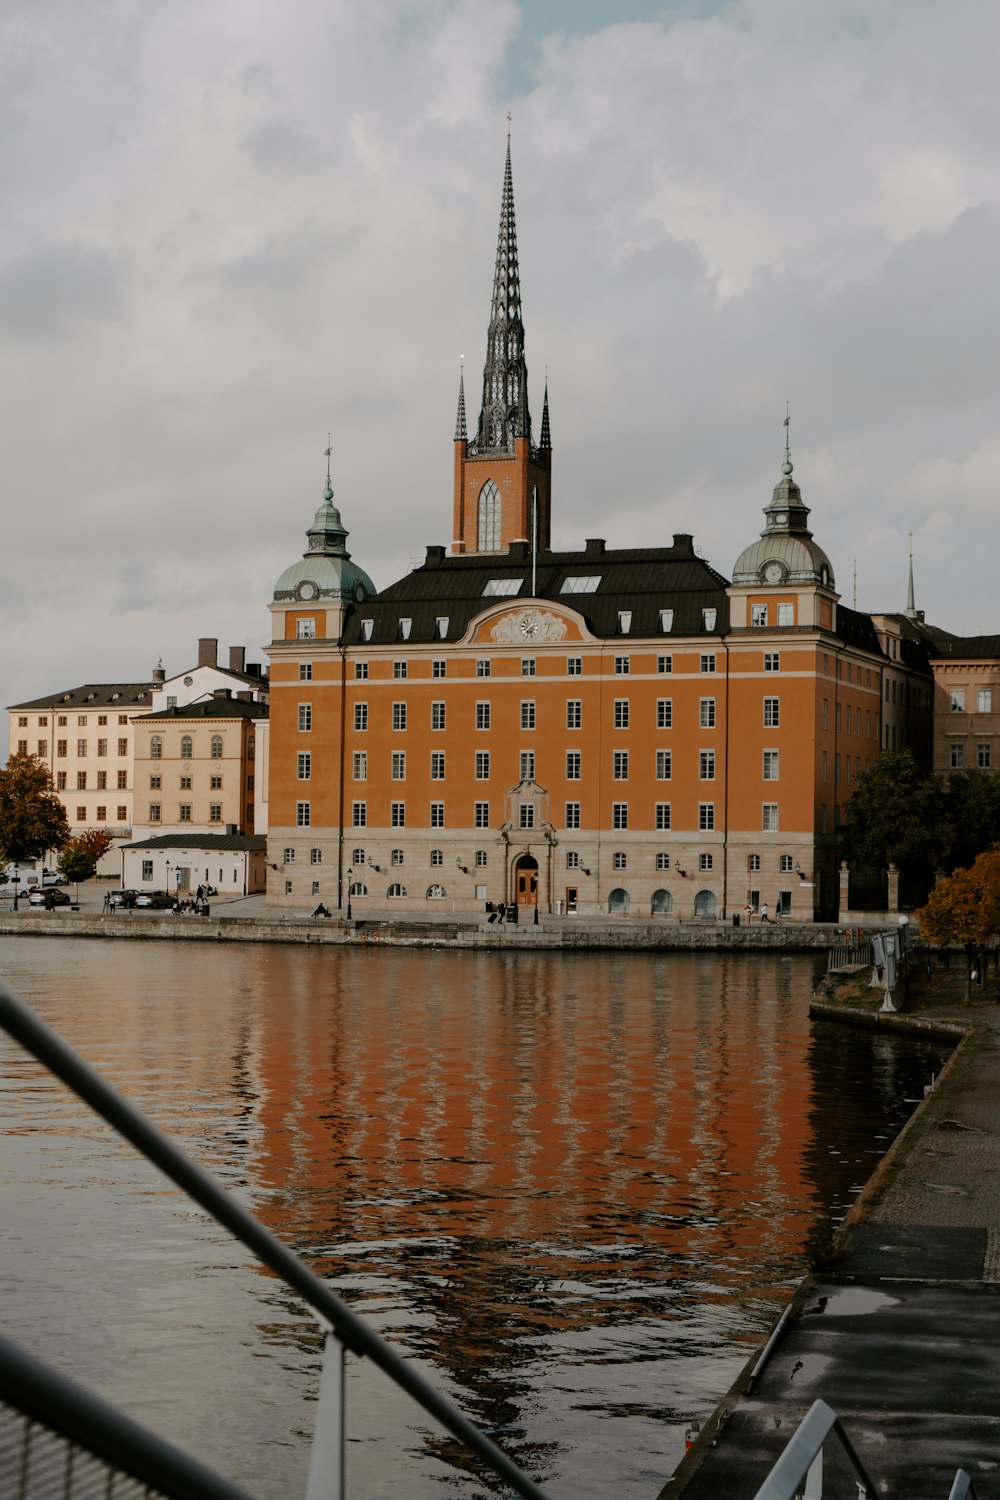 Gamla stan with a tower